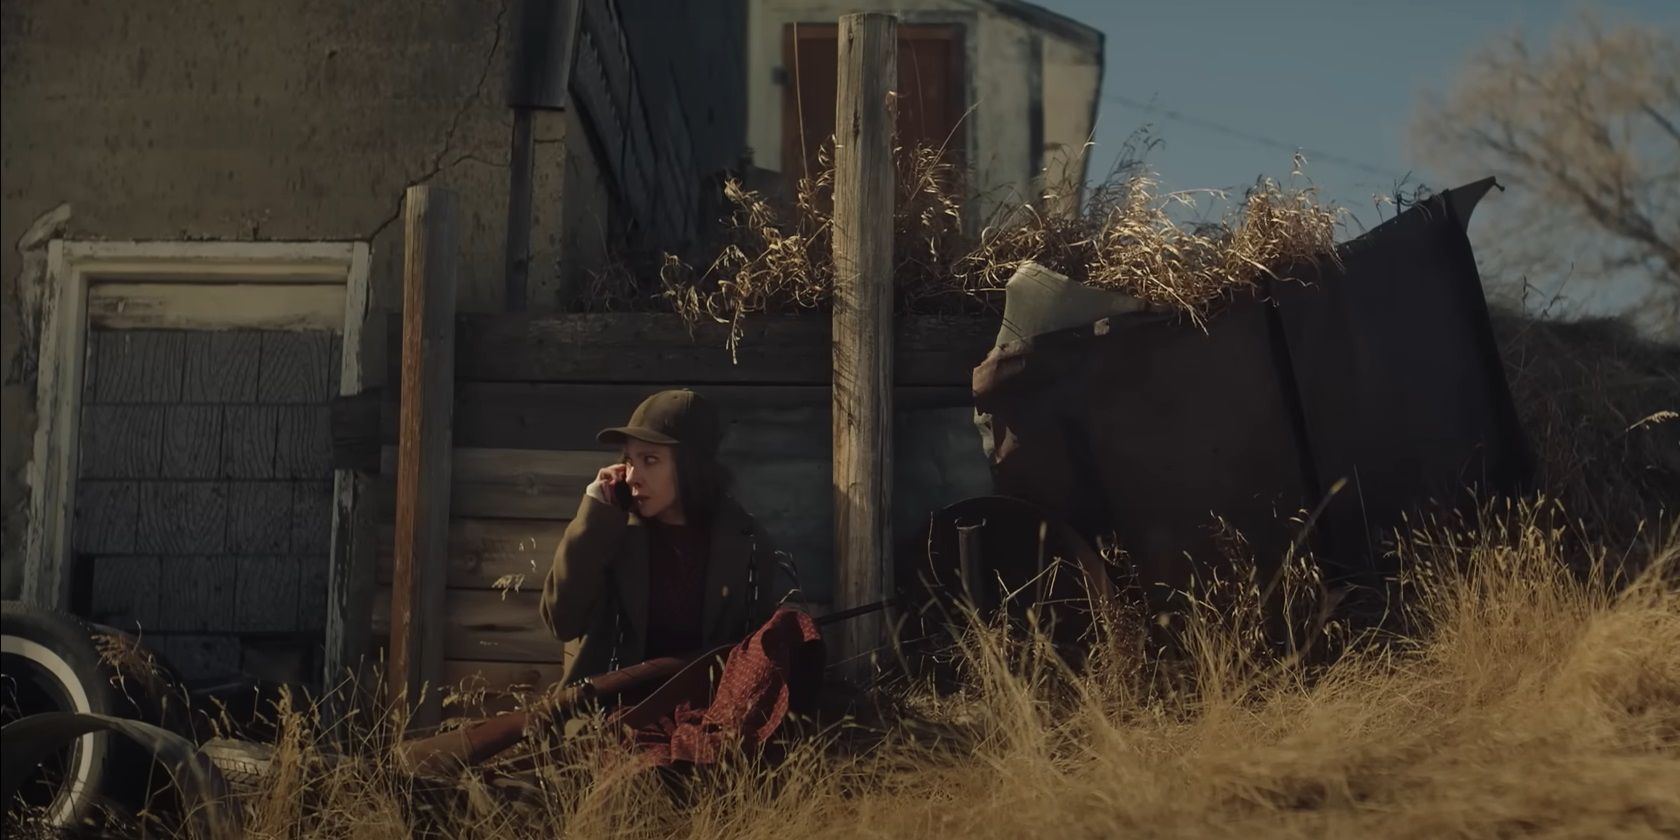 “Now The Tiger Is Free”: Ole Munch’s Big Fargo Season 5 Decision Explained